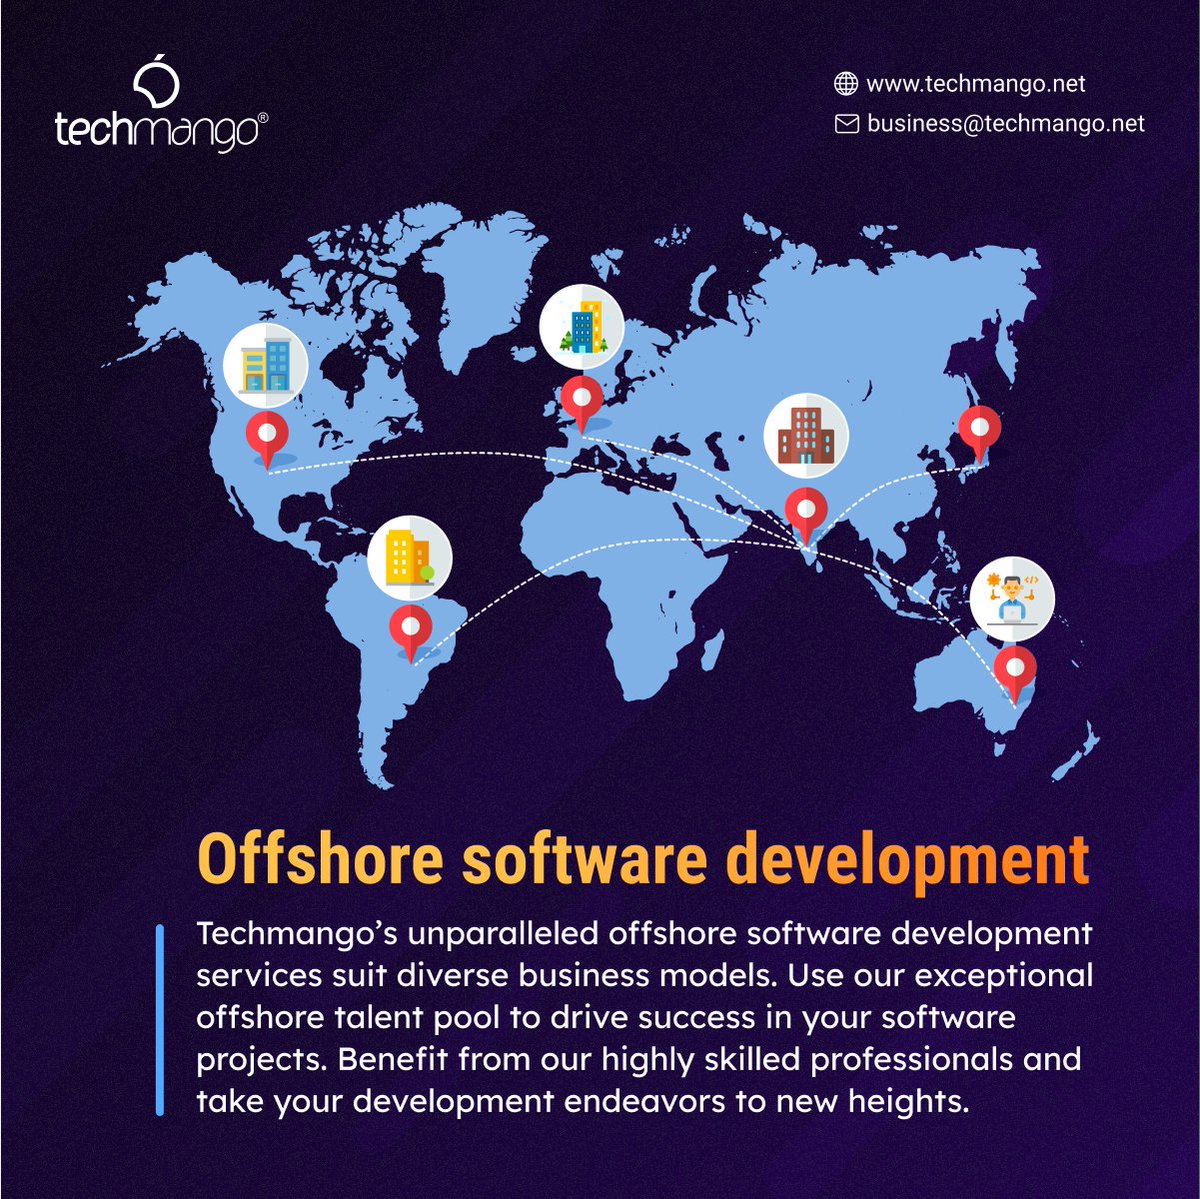 Techmango’s unparalleled offshore software development services suit diverse #business models. Use our exceptional offshore talent pool to drive success in your #software projects. 👉bit.ly/3Dtko6S #offshore #softwaredevelopment #offshorecenter #techmango